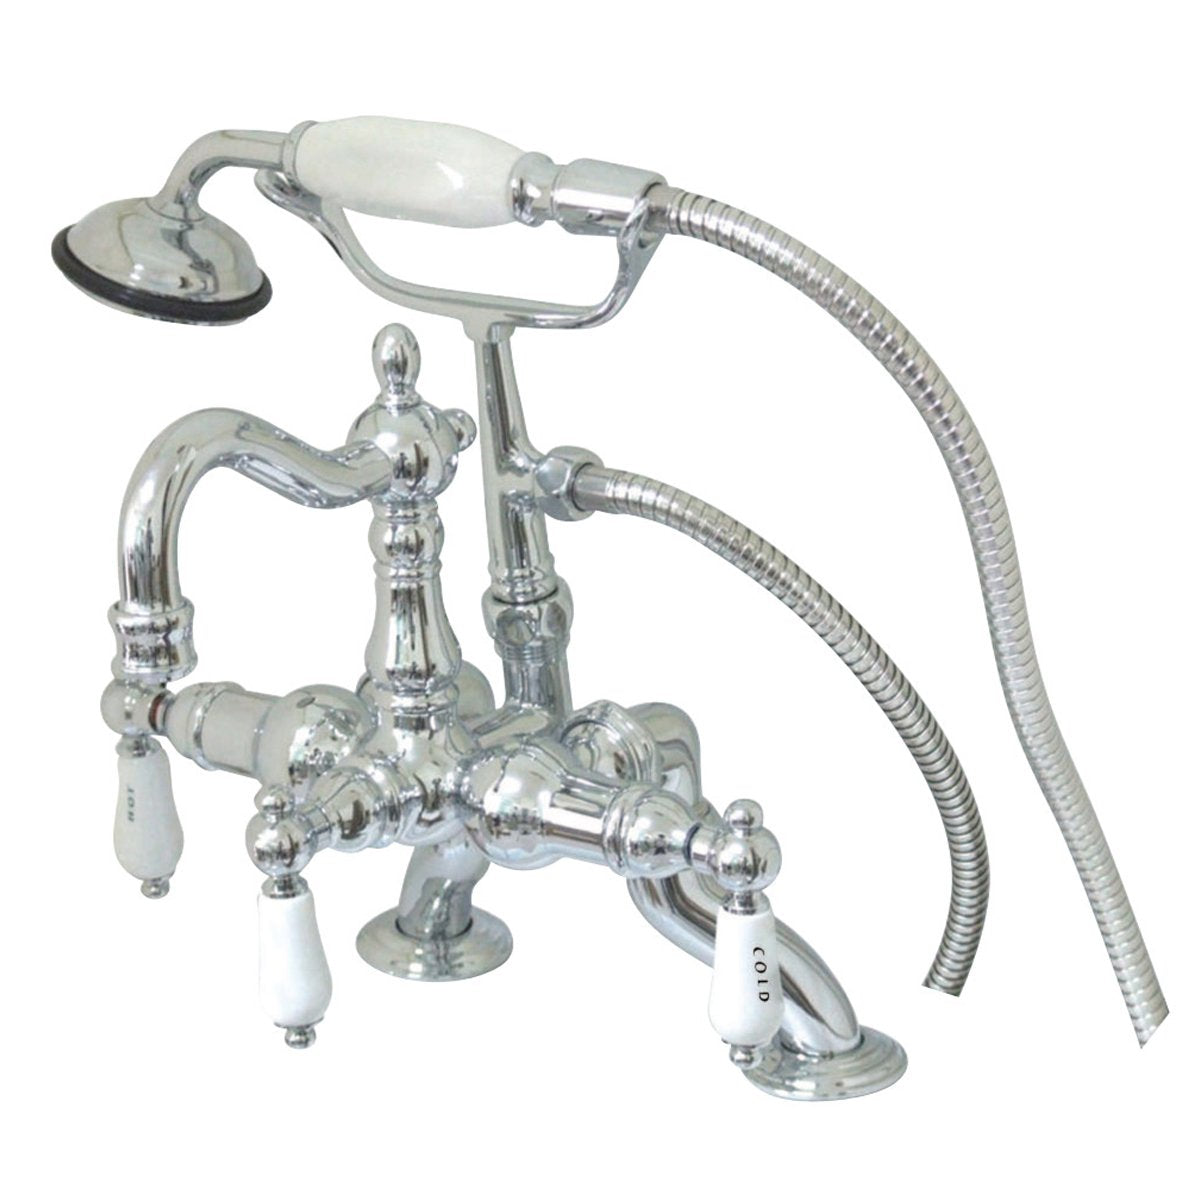 Kingston Brass Vintage Clawfoot  11" x 6" Tub Faucet with Hand Shower